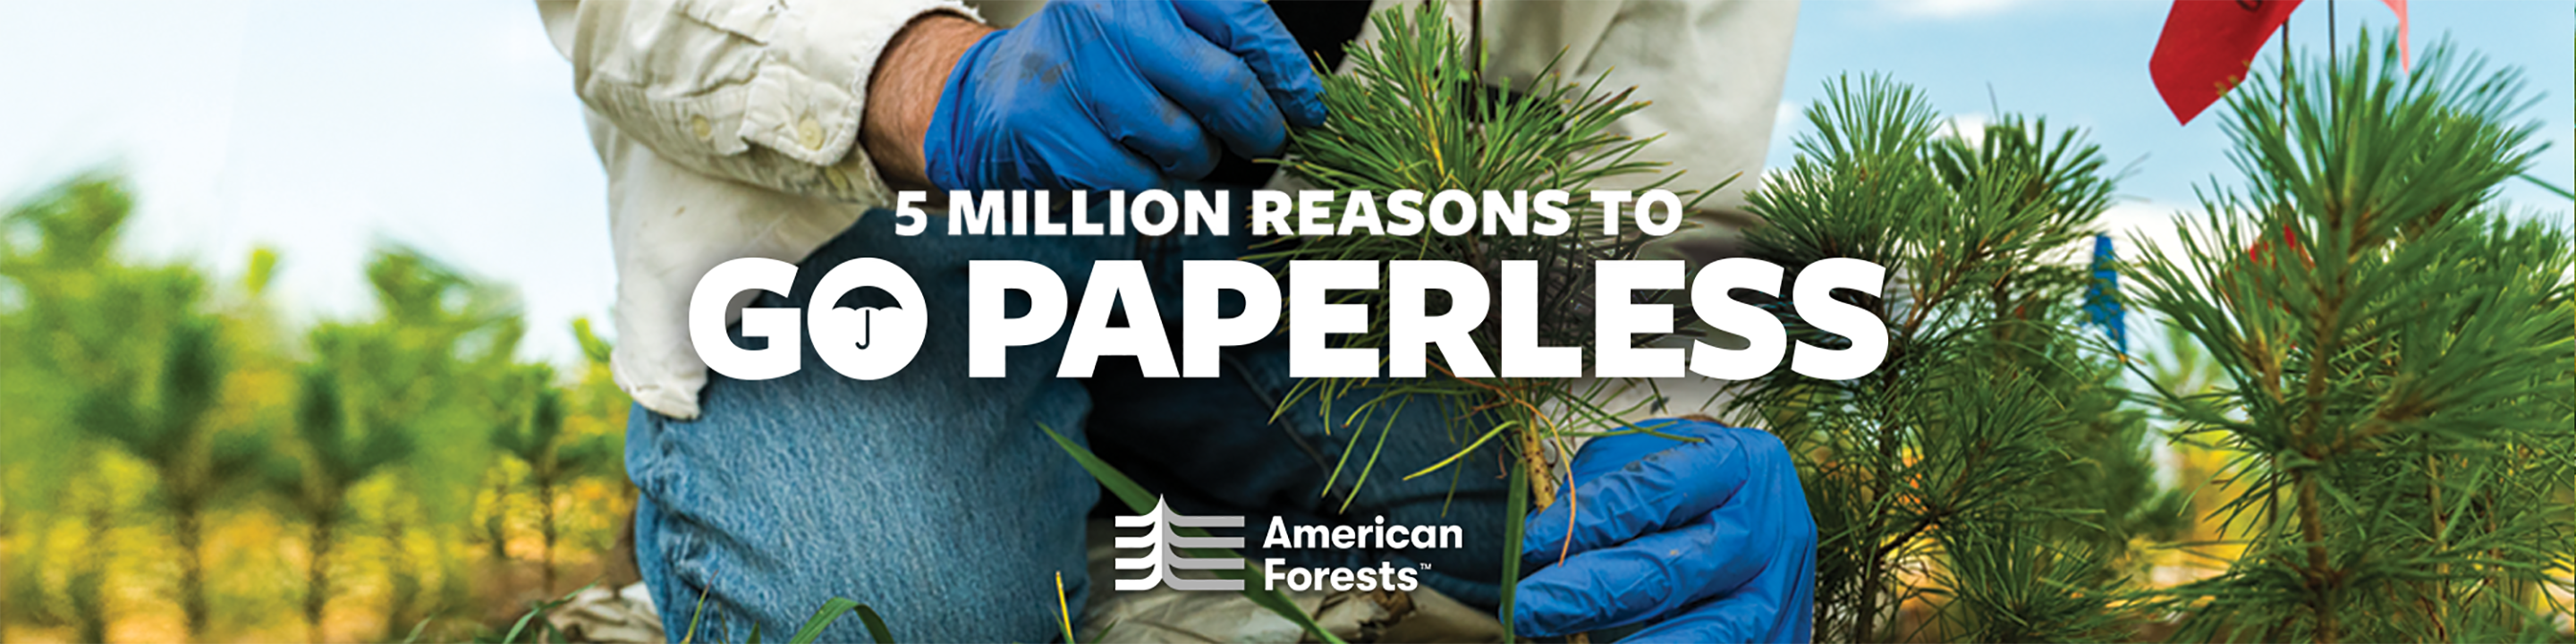 5 Million Reasons to Go Paperless” with American Forests Logo. Person planting a seedling pine.